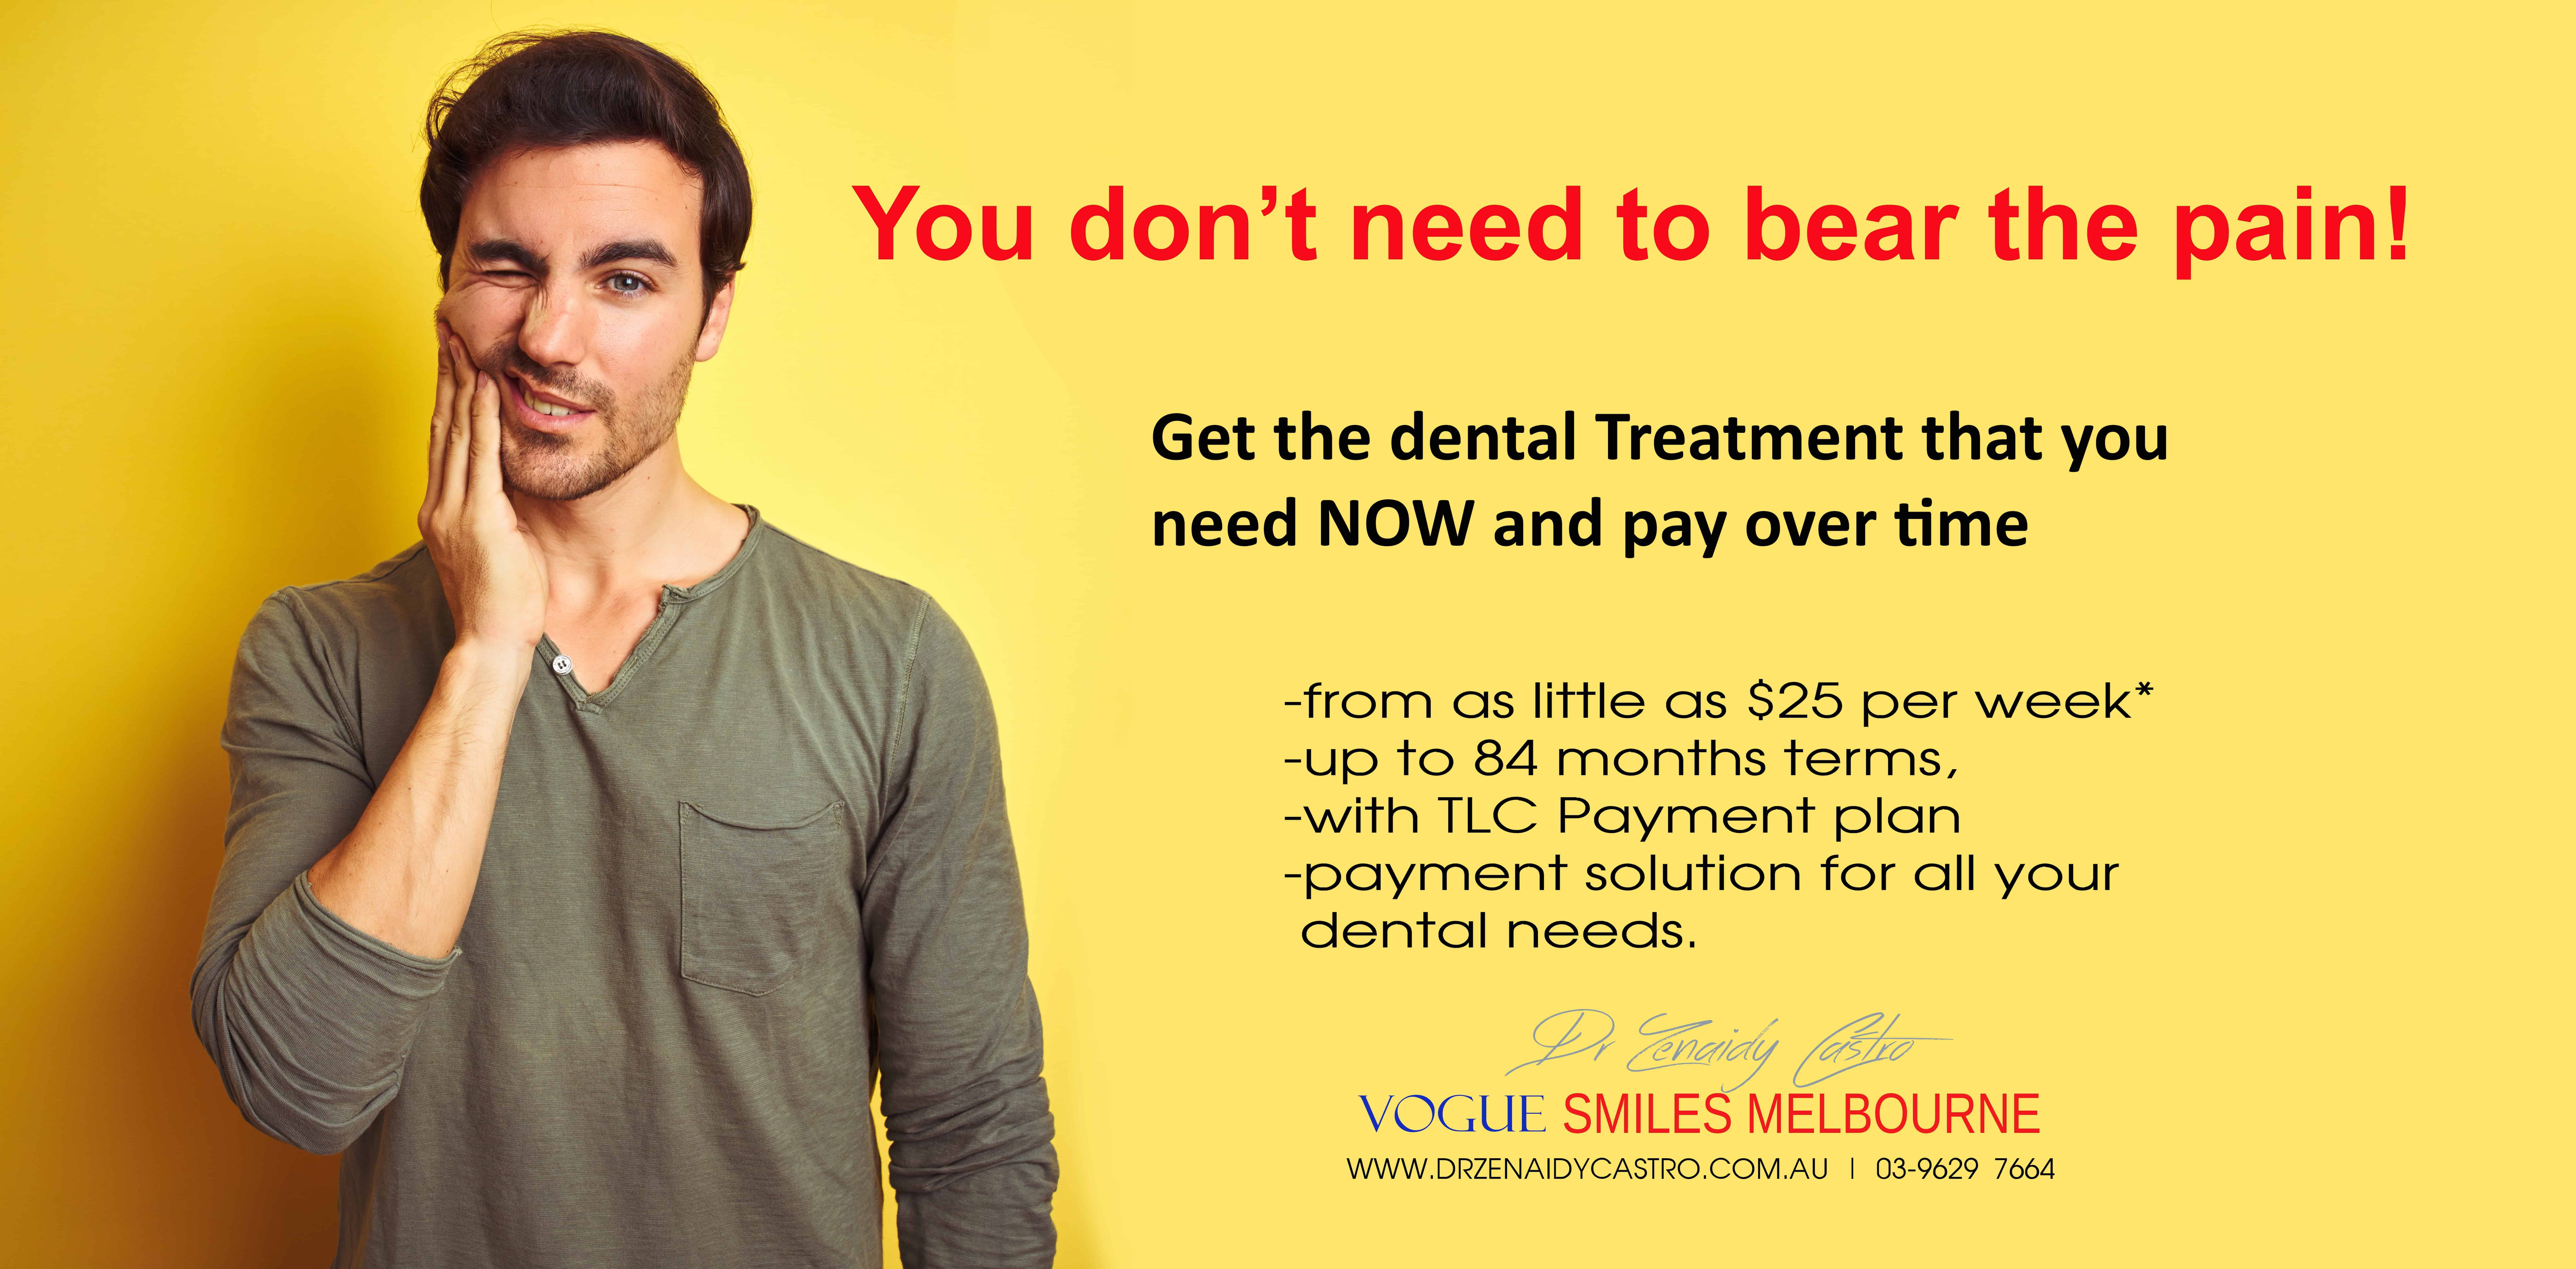 PAYMENT PLAN SOLUTIONS FOR TOOTH PROBLEM AND DENTAL EMERGENCY dentist melbourne cbd